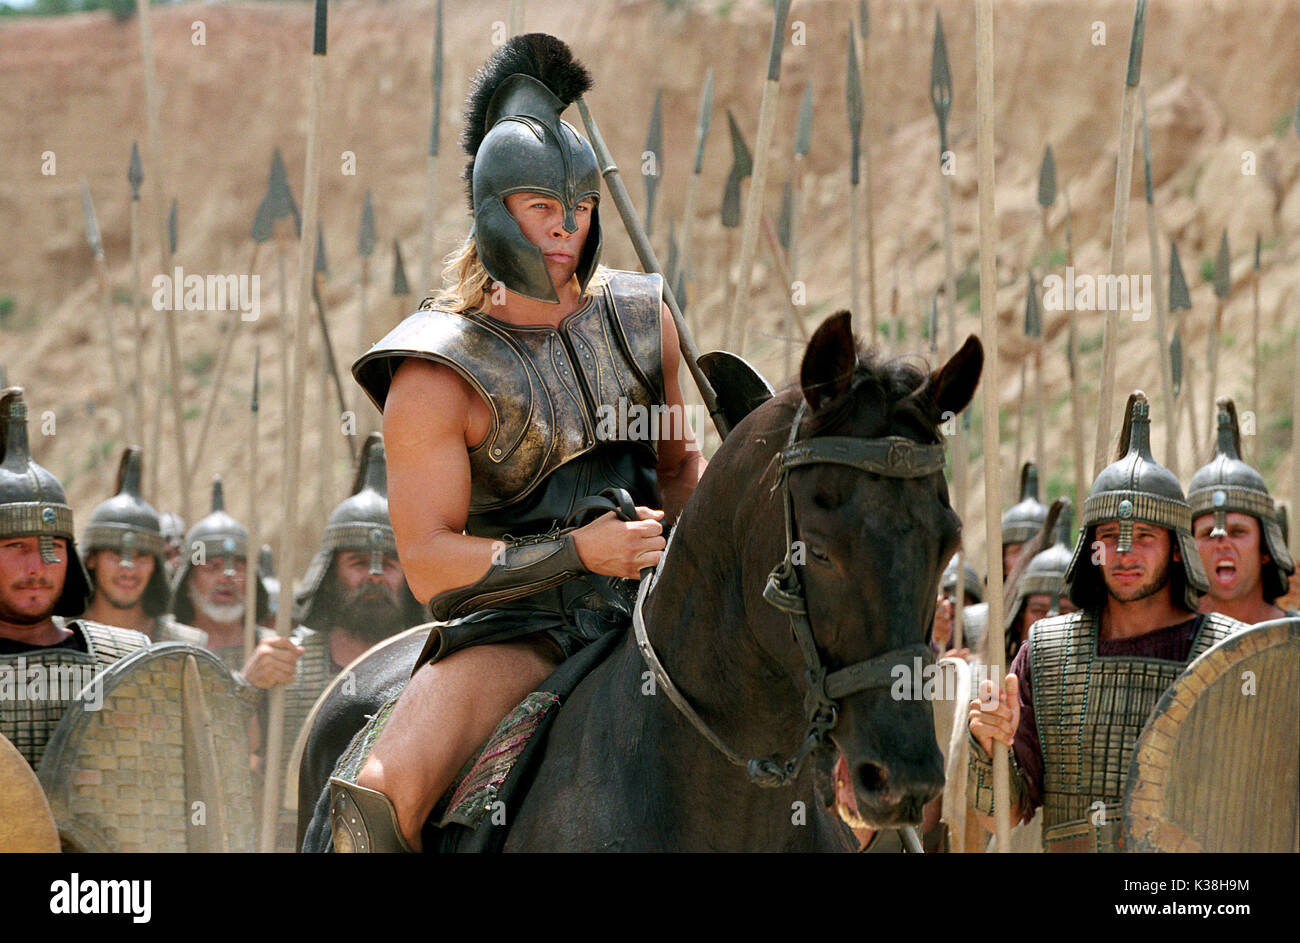 BRAD PITT stars as 'Achilles' in Warner Bros. Pictures' epic action adventure Troy, also starring Eric Bana and Orlando Bloom. PHOTOGRAPHS TO BE USED SOLELY FOR ADVERTISING, PROMOTION, PUBLICITY OR REVIEWS OF THIS SPECIFIC MOTION PICTURE AND TO REMAIN THE PROPERTY OF THE STUDIO. NOT FOR SALE OR REDISTRIBUTION.   TROY [US 2004]  BRAD PITT BRAD PITT stars as 'Achilles' in Warner Bros. Pictures' epic action adventure Troy, also starring Eric Bana and Orlando Bloom. PHOTOGRAPHS TO BE USED SOLELY FOR ADVERTISING, PROMOTION, PUBLICITY OR REVIEWS OF THIS SPECIFIC MOTION PICTUR Stock Photo